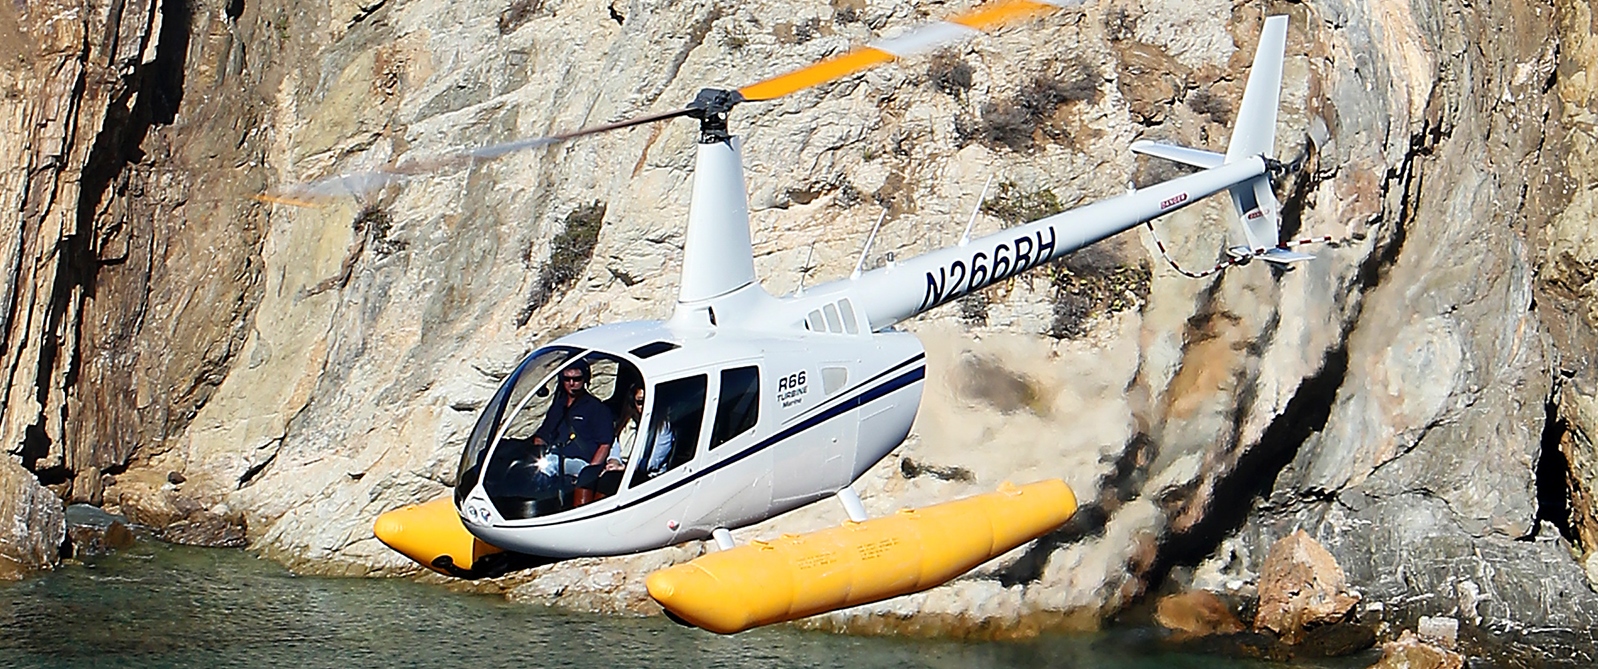 FAA Certifies Floats for Robinson R66 Turbine Helicopter